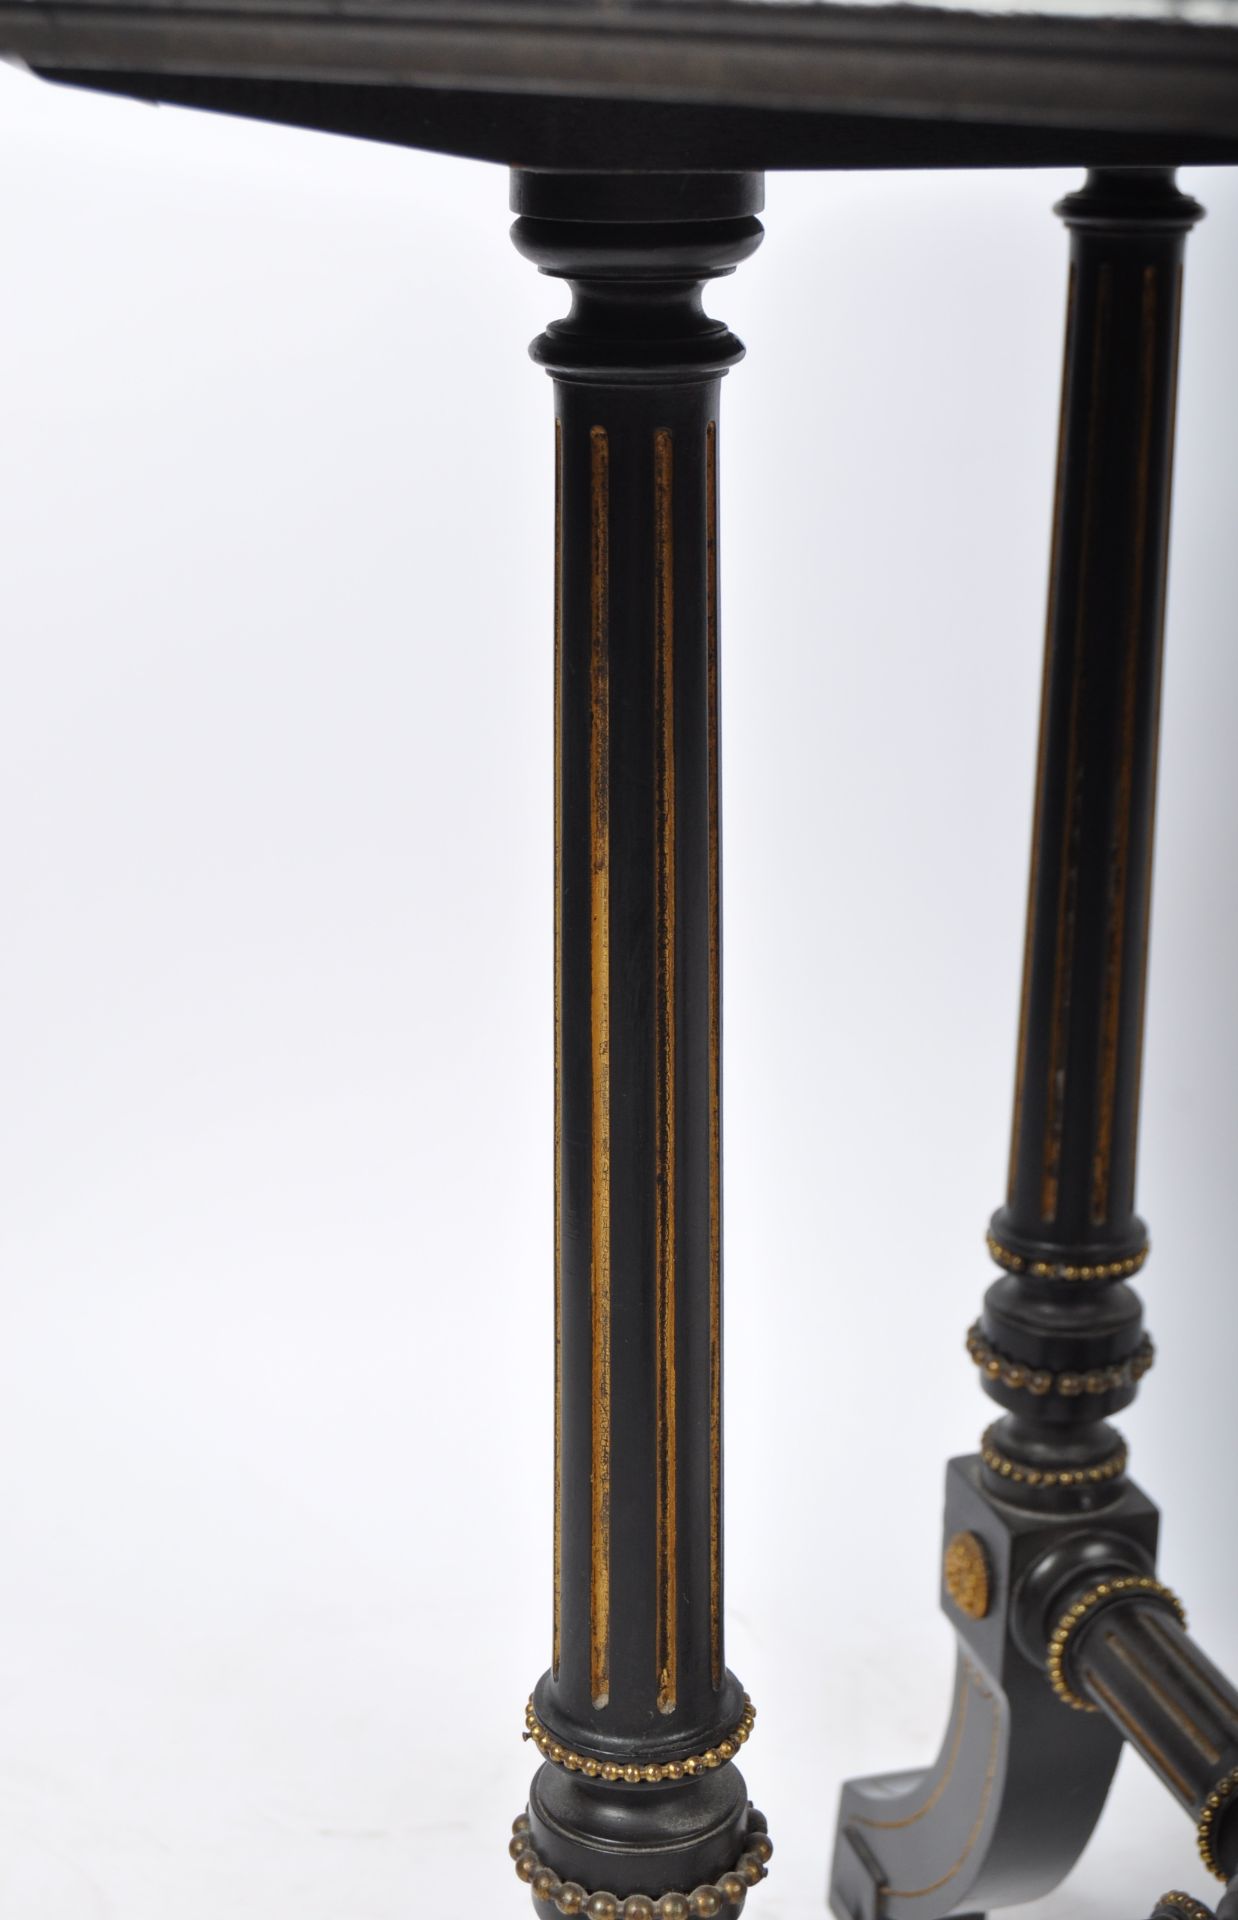 GILLOW & CO 19TH CENTURY EBONISED AND GILDED SIDE TABLE - Image 6 of 8